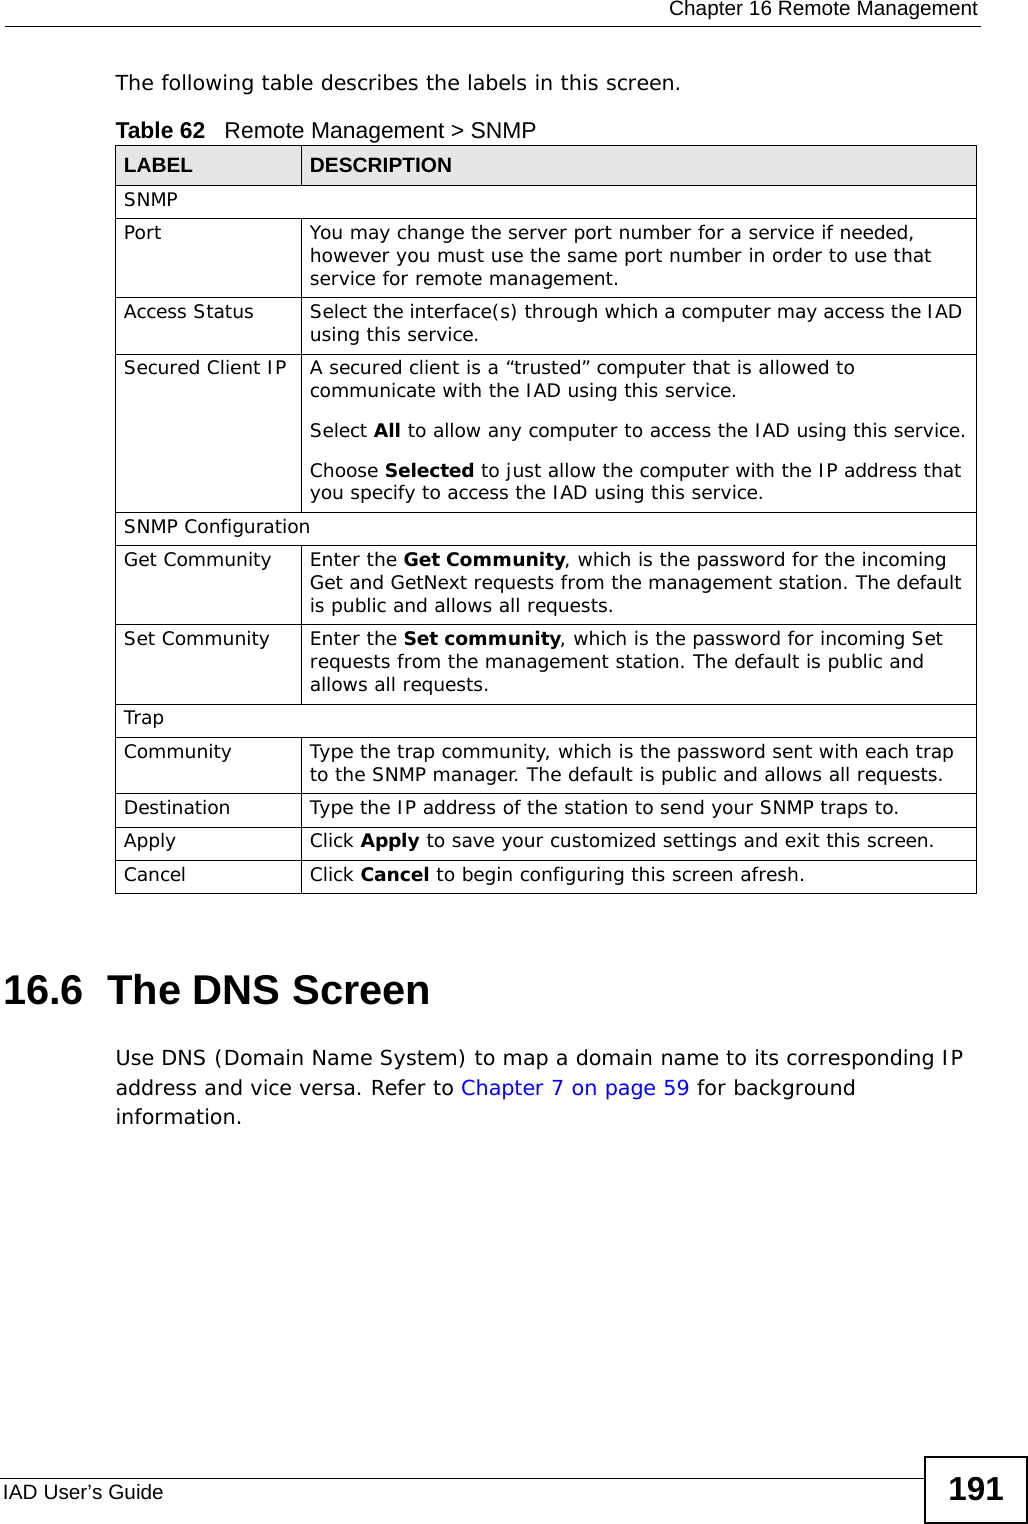  Chapter 16 Remote ManagementIAD User’s Guide 191The following table describes the labels in this screen. 16.6  The DNS Screen  Use DNS (Domain Name System) to map a domain name to its corresponding IP address and vice versa. Refer to Chapter 7 on page 59 for background information. Table 62   Remote Management &gt; SNMPLABEL DESCRIPTIONSNMPPort You may change the server port number for a service if needed, however you must use the same port number in order to use that service for remote management.Access Status Select the interface(s) through which a computer may access the IAD using this service.Secured Client IP A secured client is a “trusted” computer that is allowed to communicate with the IAD using this service. Select All to allow any computer to access the IAD using this service.Choose Selected to just allow the computer with the IP address that you specify to access the IAD using this service.SNMP ConfigurationGet Community Enter the Get Community, which is the password for the incoming Get and GetNext requests from the management station. The default is public and allows all requests.Set Community Enter the Set community, which is the password for incoming Set requests from the management station. The default is public and allows all requests.TrapCommunity Type the trap community, which is the password sent with each trap to the SNMP manager. The default is public and allows all requests.Destination Type the IP address of the station to send your SNMP traps to.Apply Click Apply to save your customized settings and exit this screen. Cancel Click Cancel to begin configuring this screen afresh.